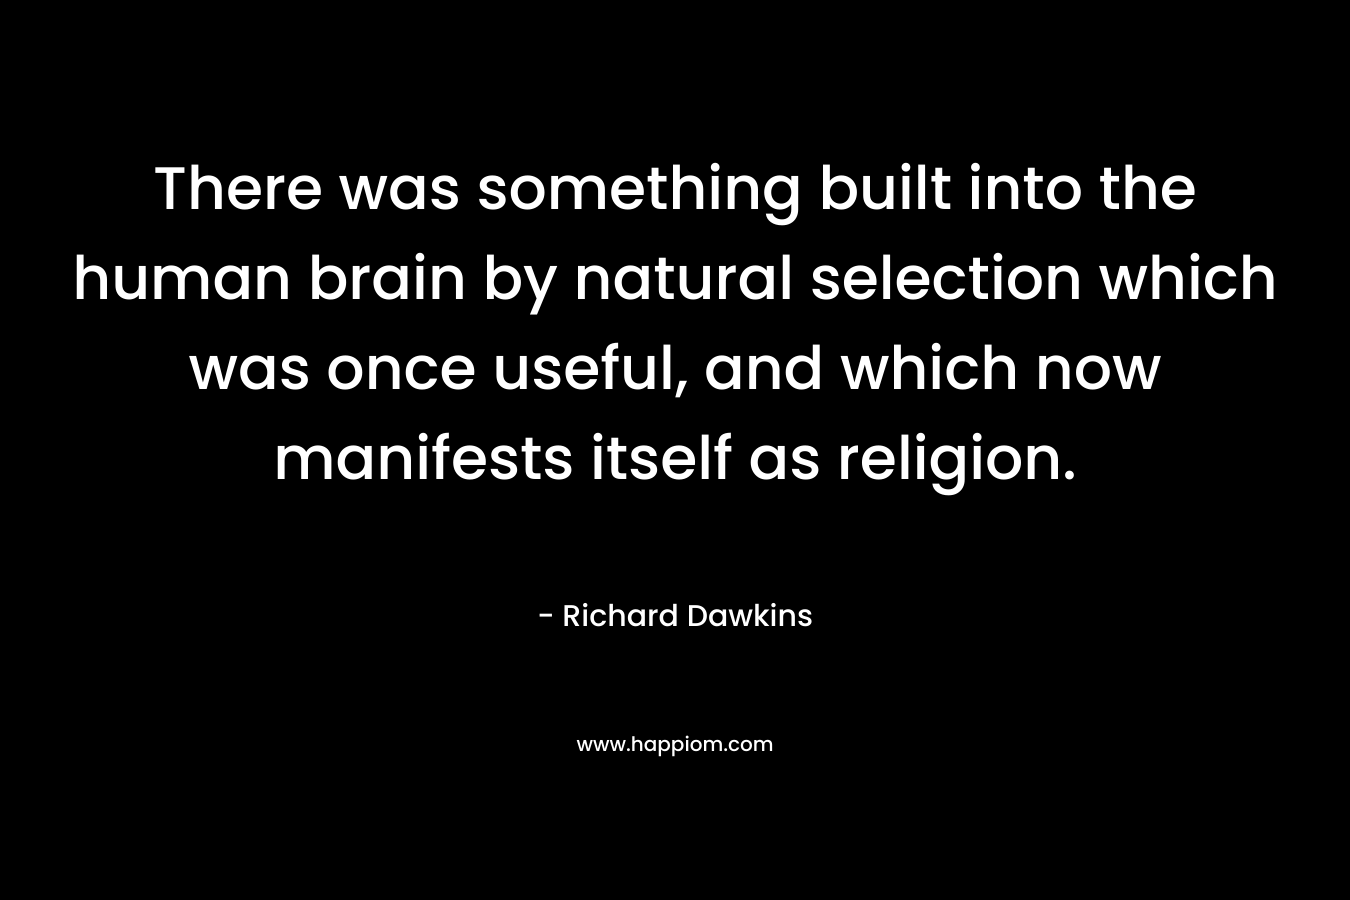 There was something built into the human brain by natural selection which was once useful, and which now manifests itself as religion. – Richard Dawkins